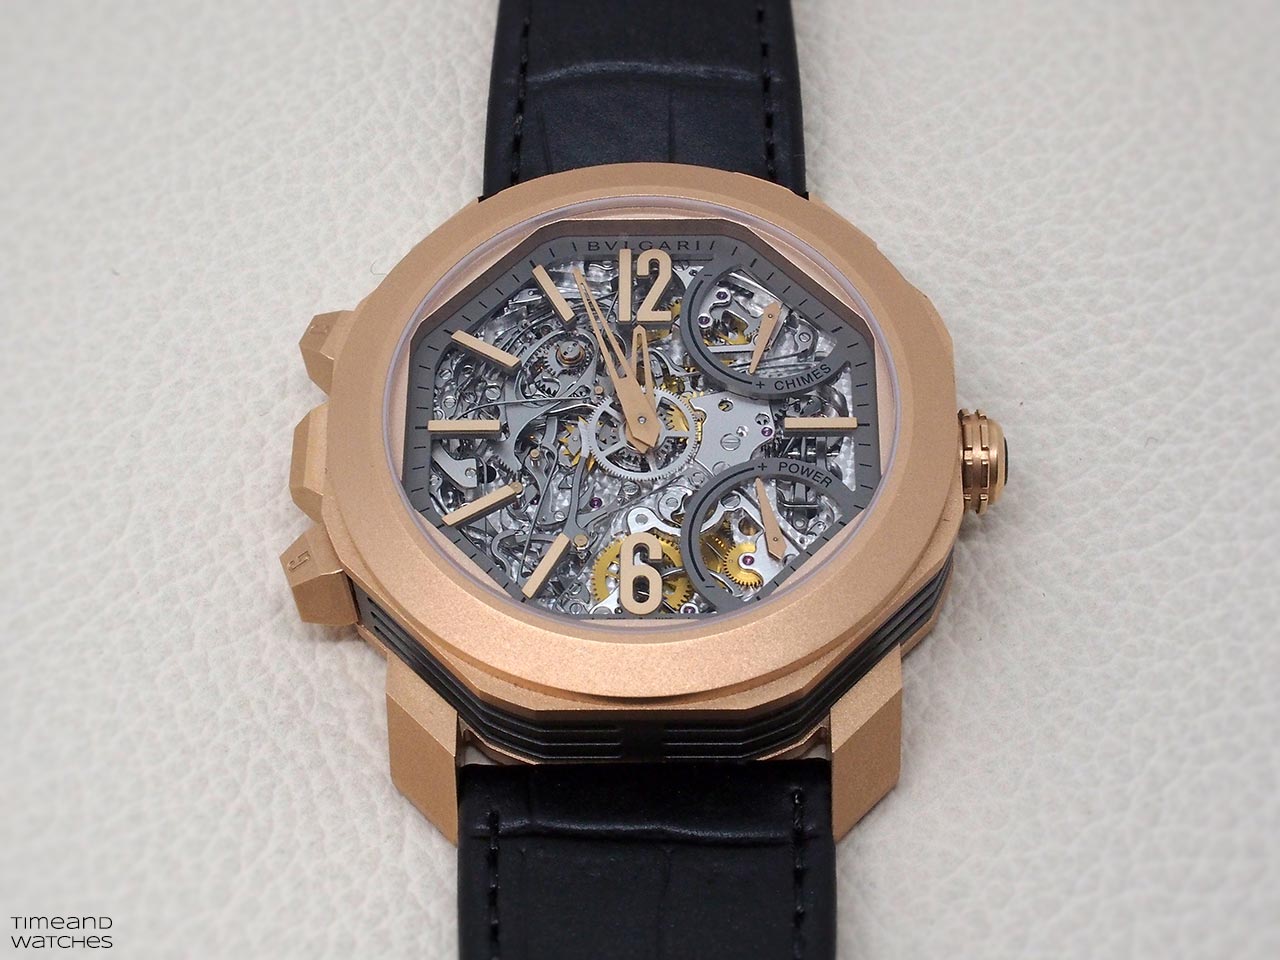 Bulgari - Octo Grande Sonnerie in Rose Gold Ref. 102865 | Time and ...